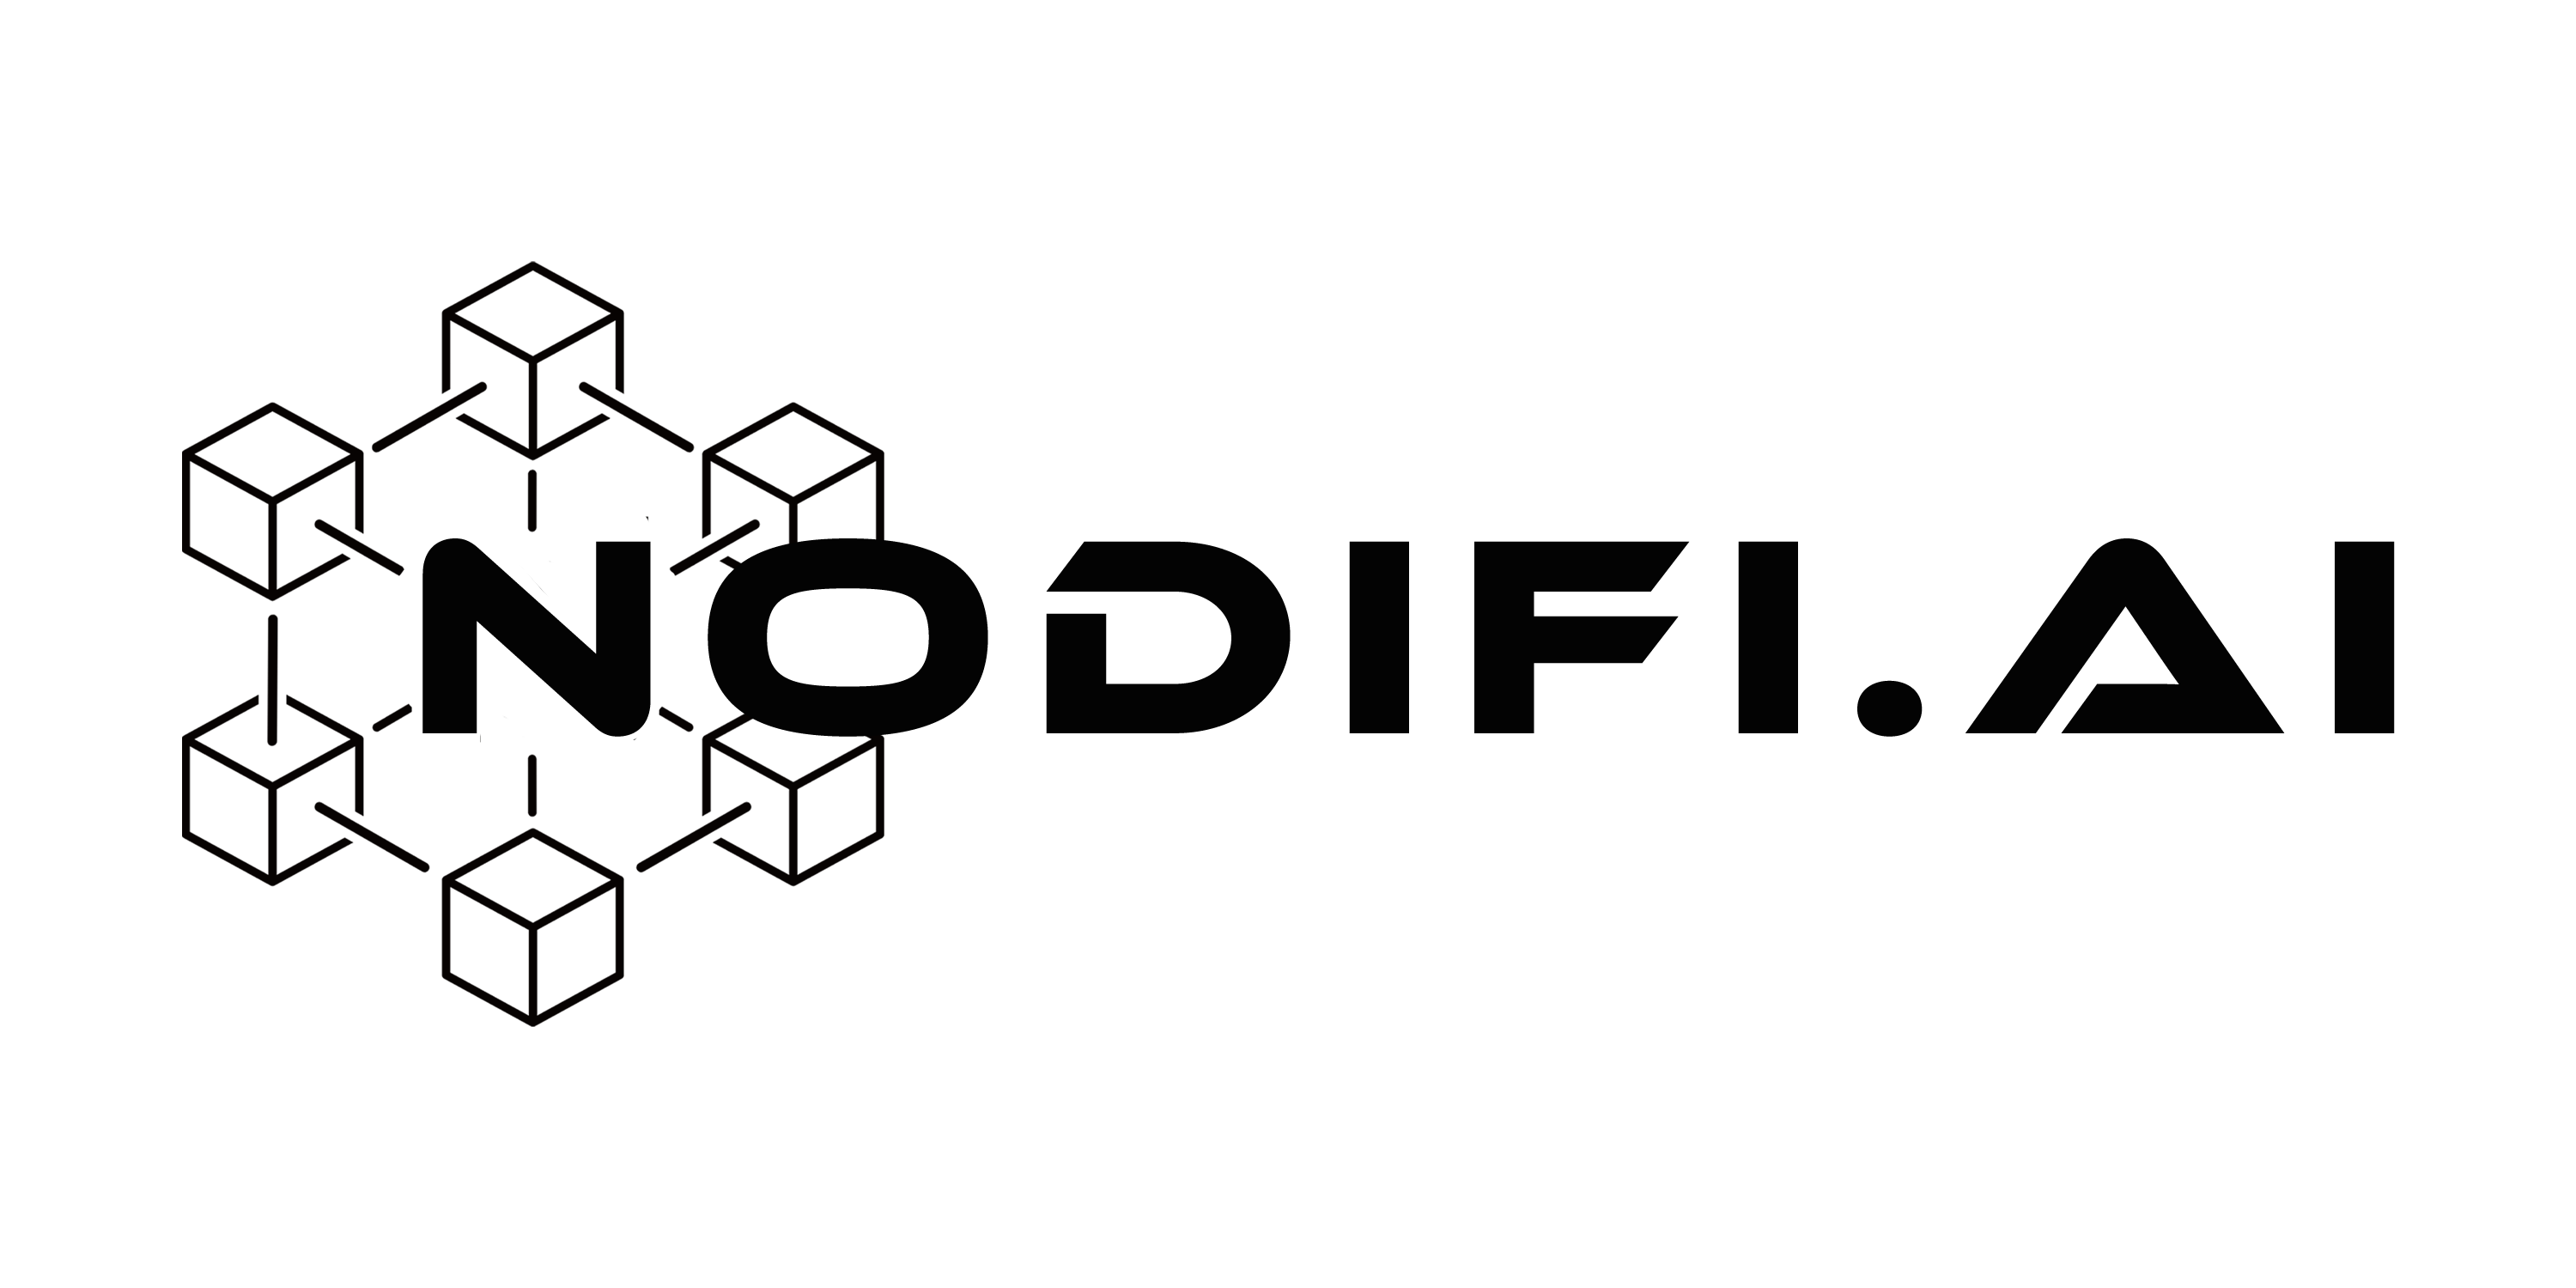 , $NODIFI: Pioneering the Future of DeFi with Revolutionary Nodes-As-a-Service (NaaS) Protocol